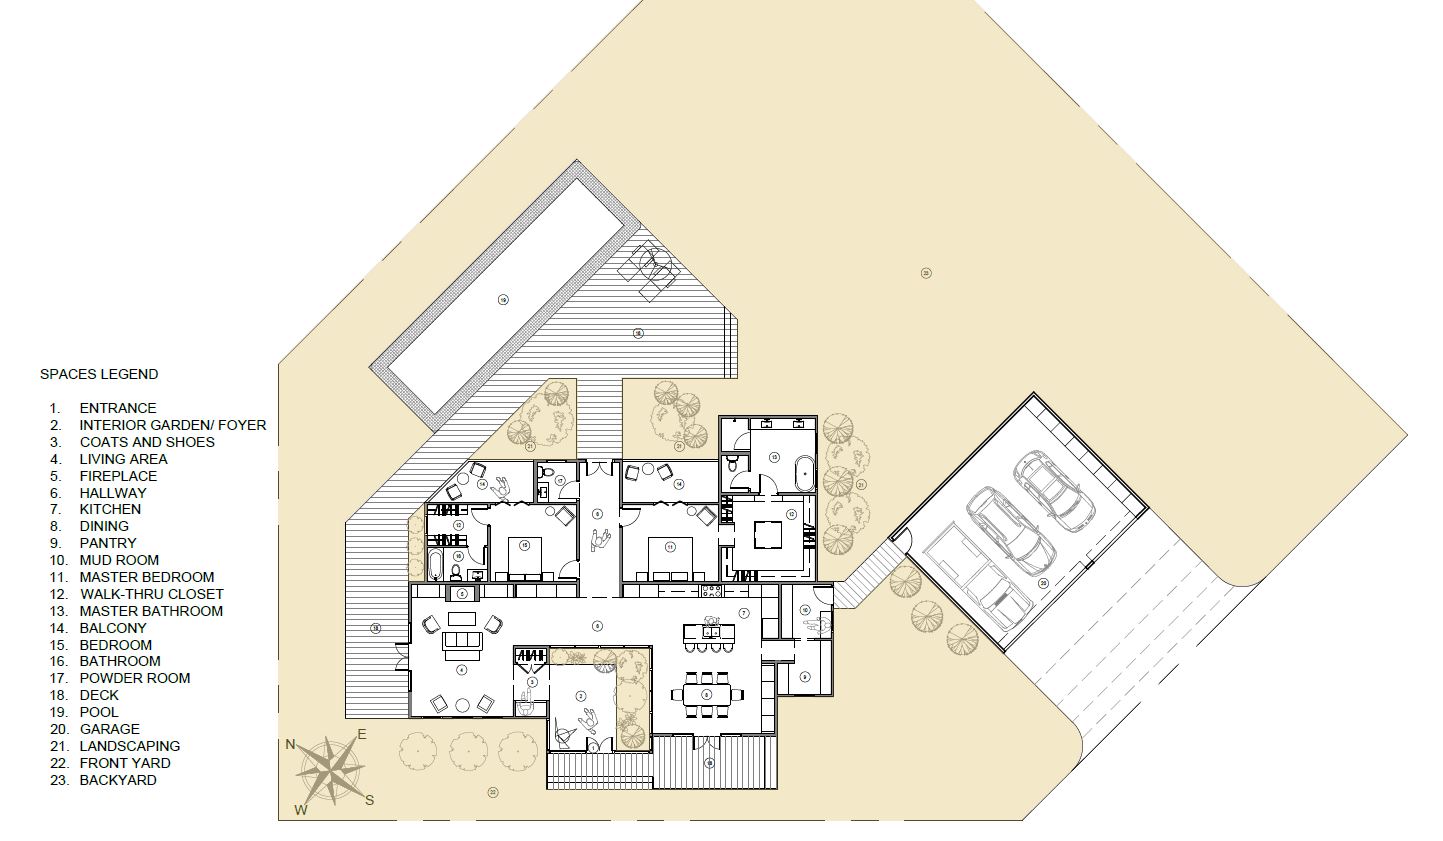 conceptual floor plan showing all house space including landscaping 